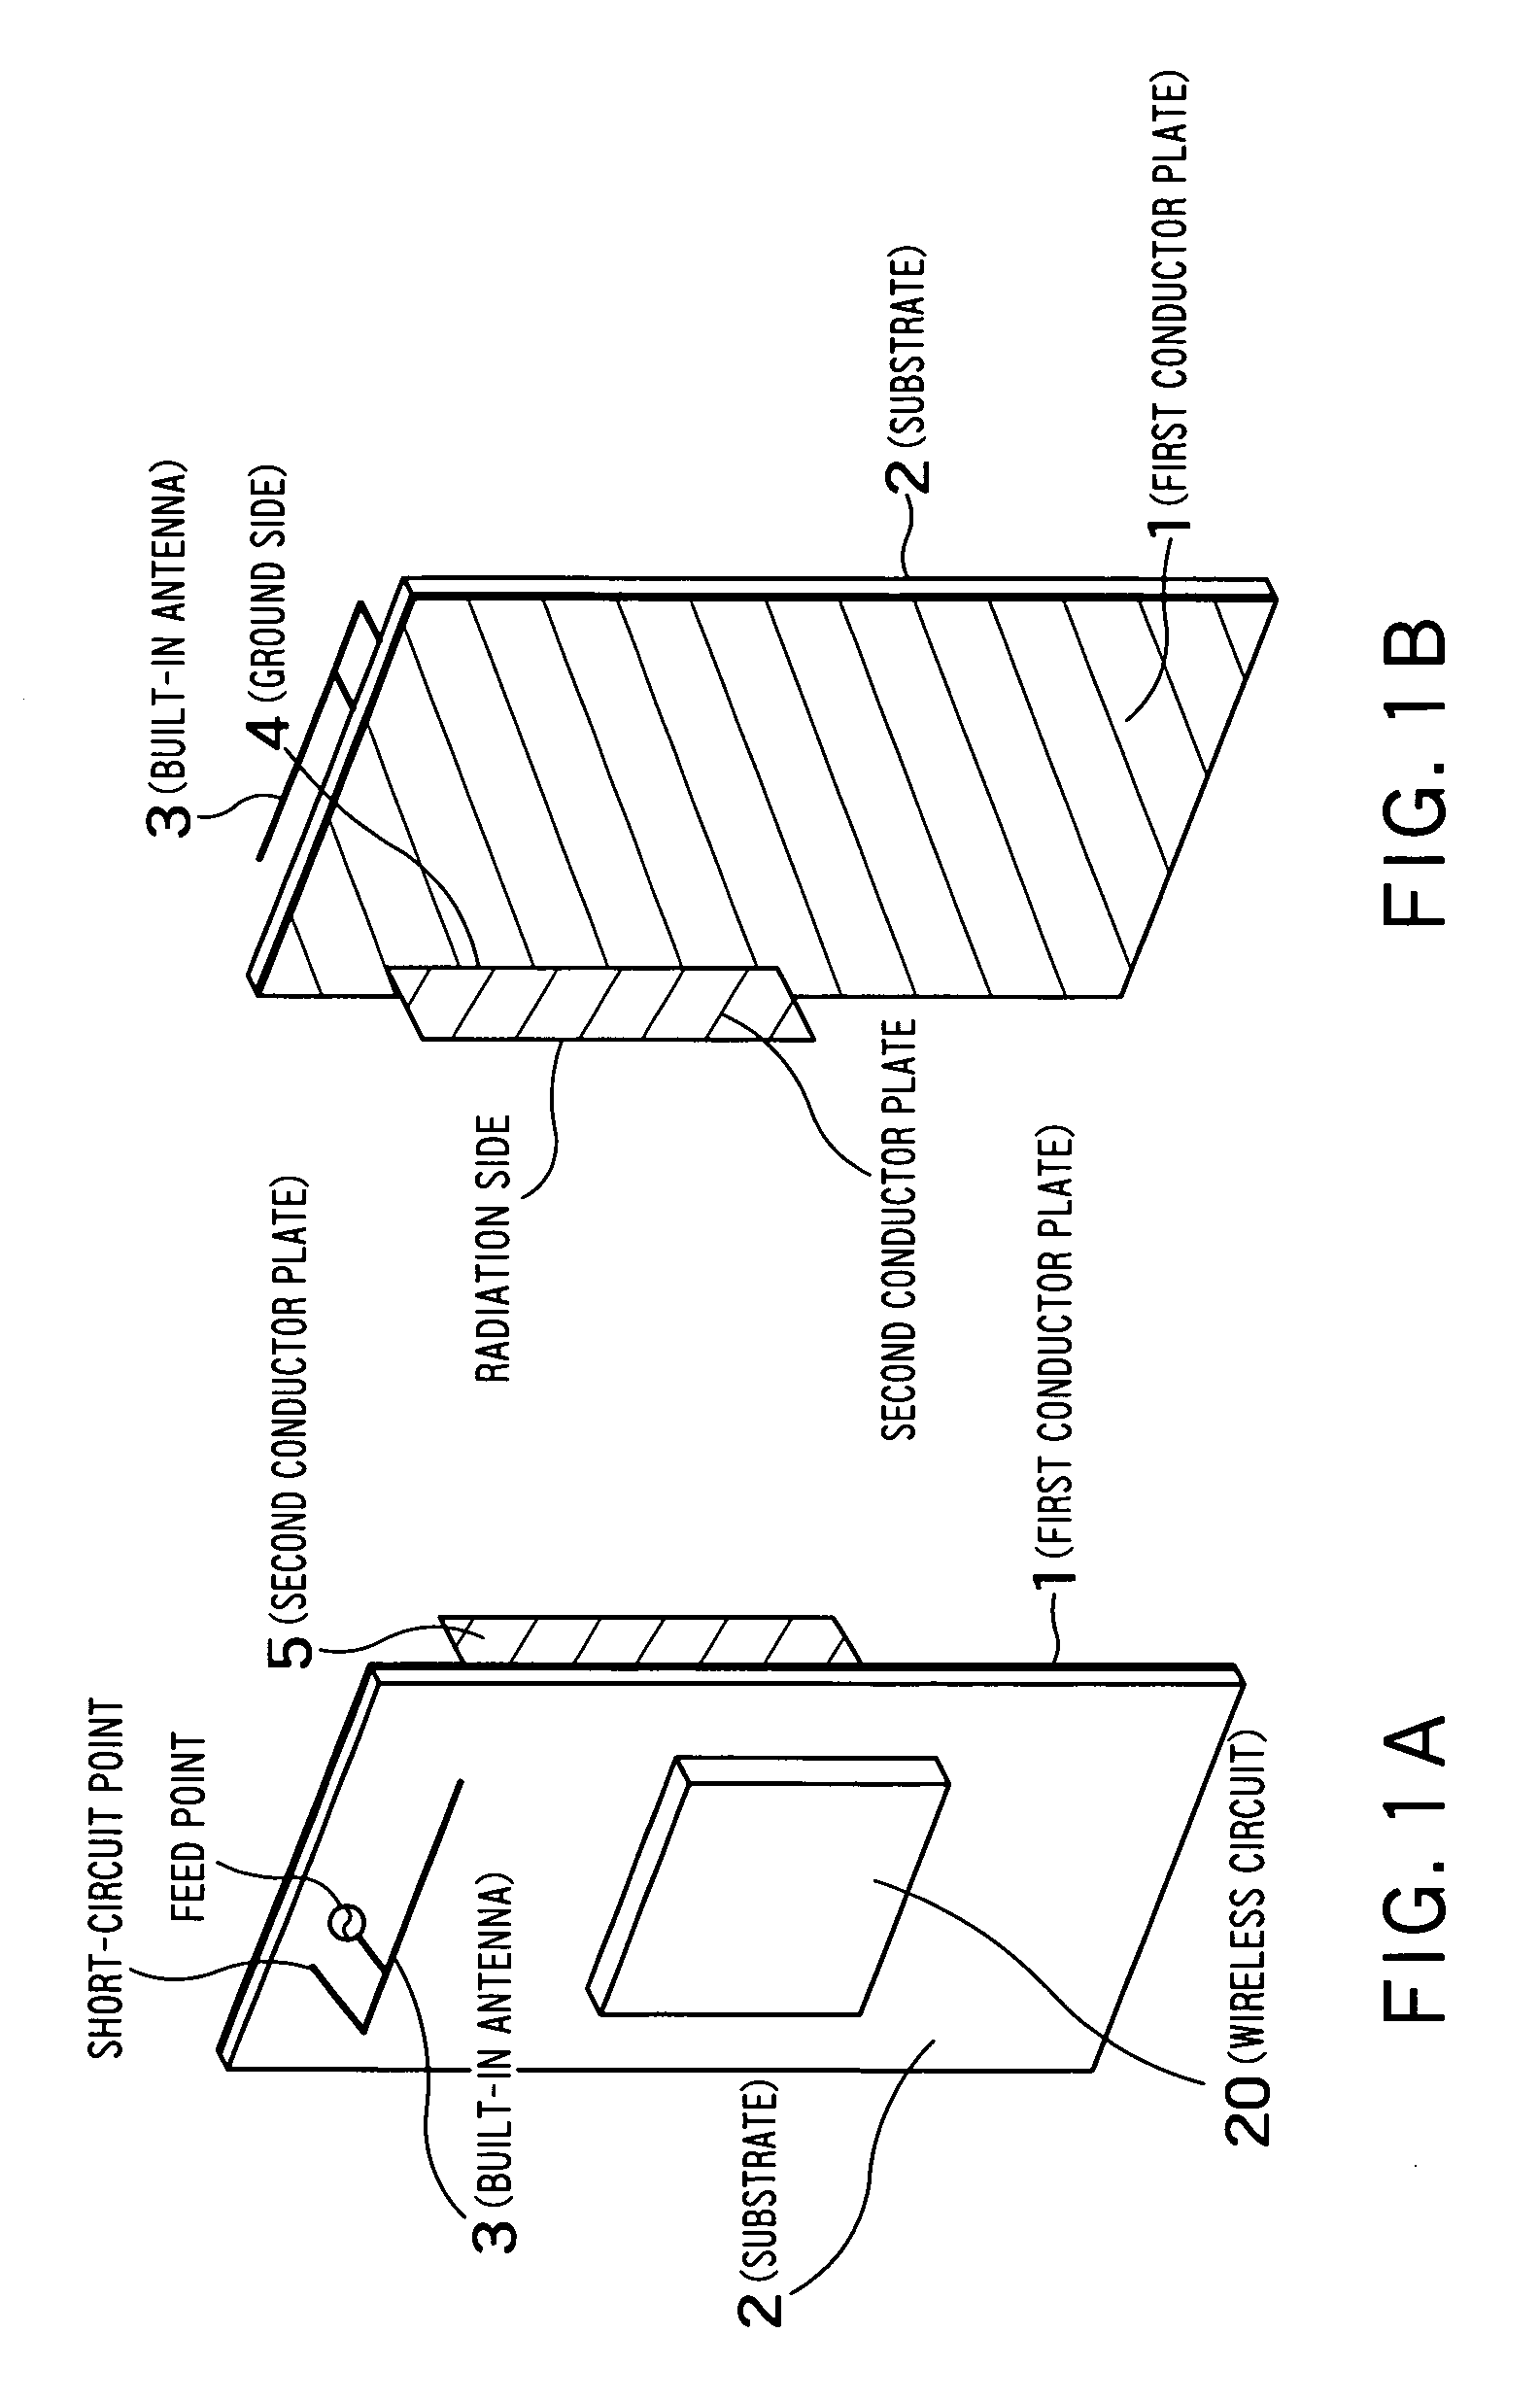 Mobile transceiver and antenna device